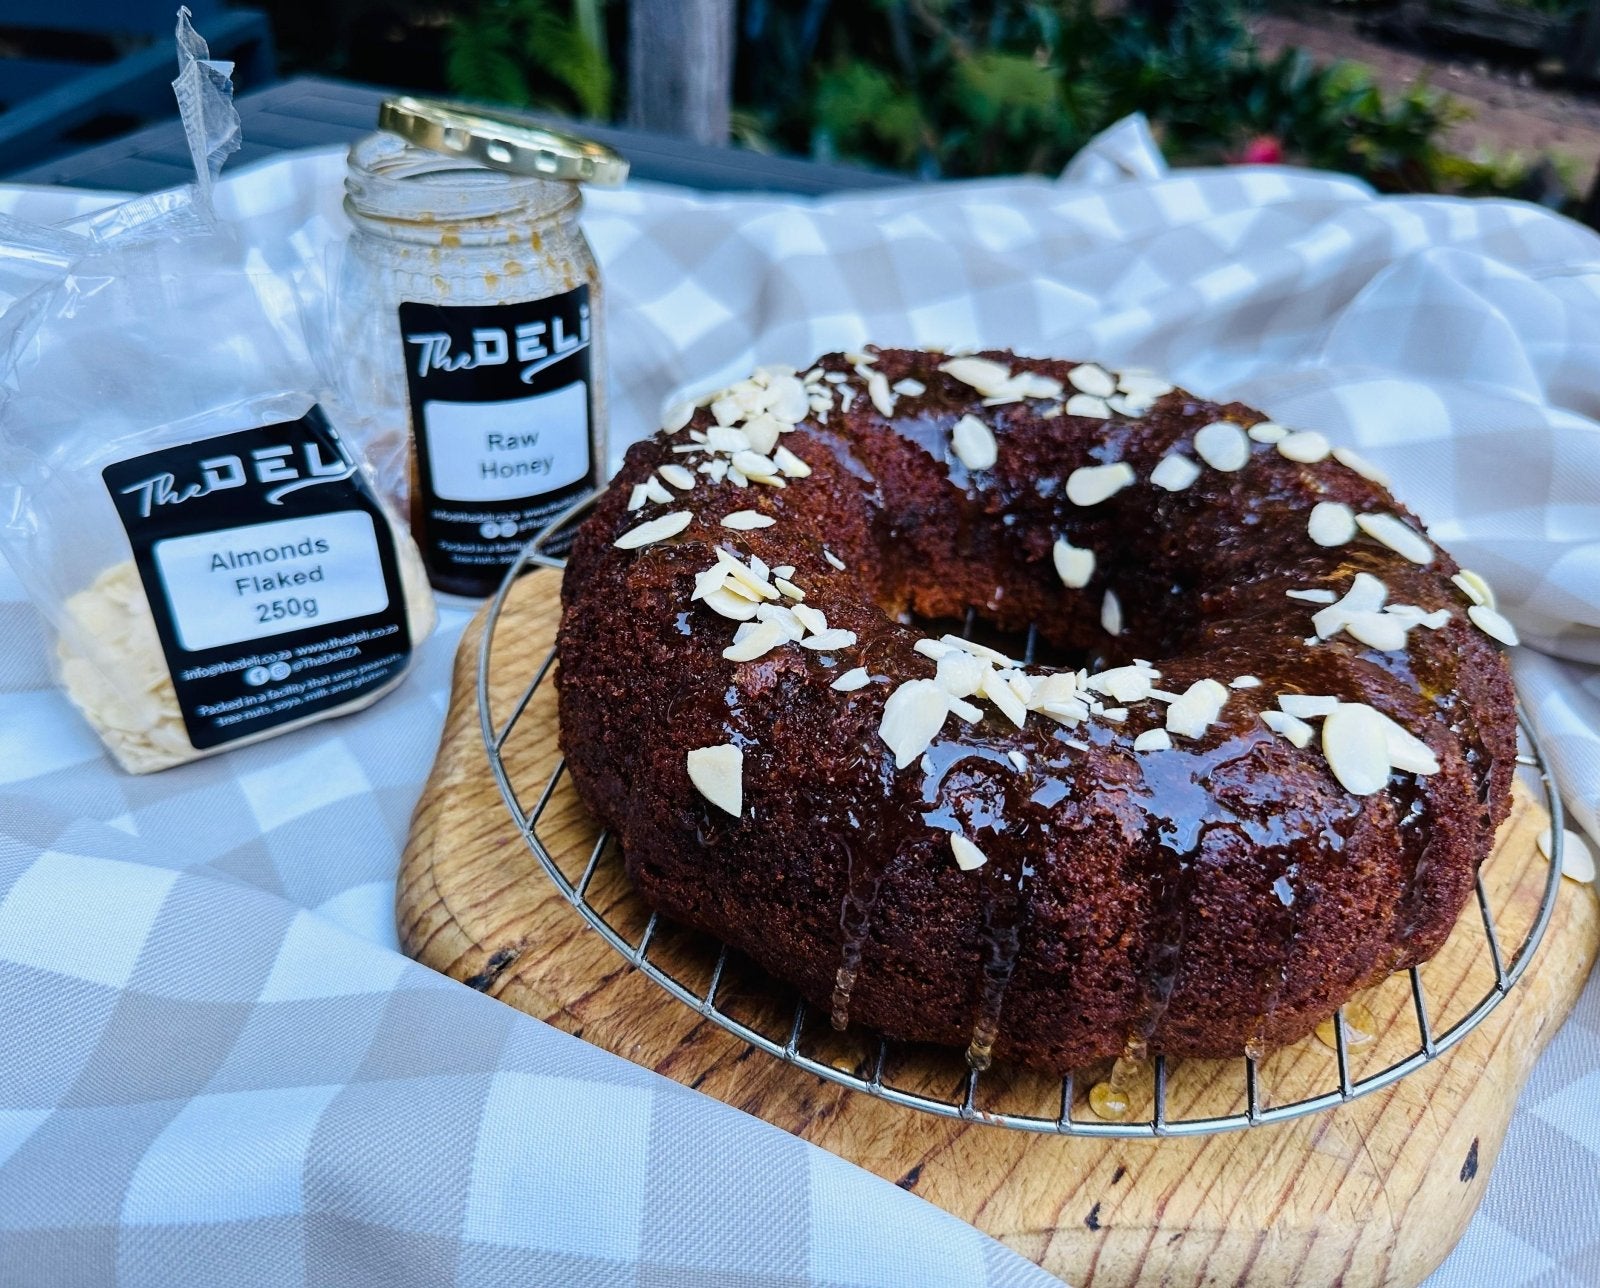 Honey Cake with Flaked Almonds - The Deli